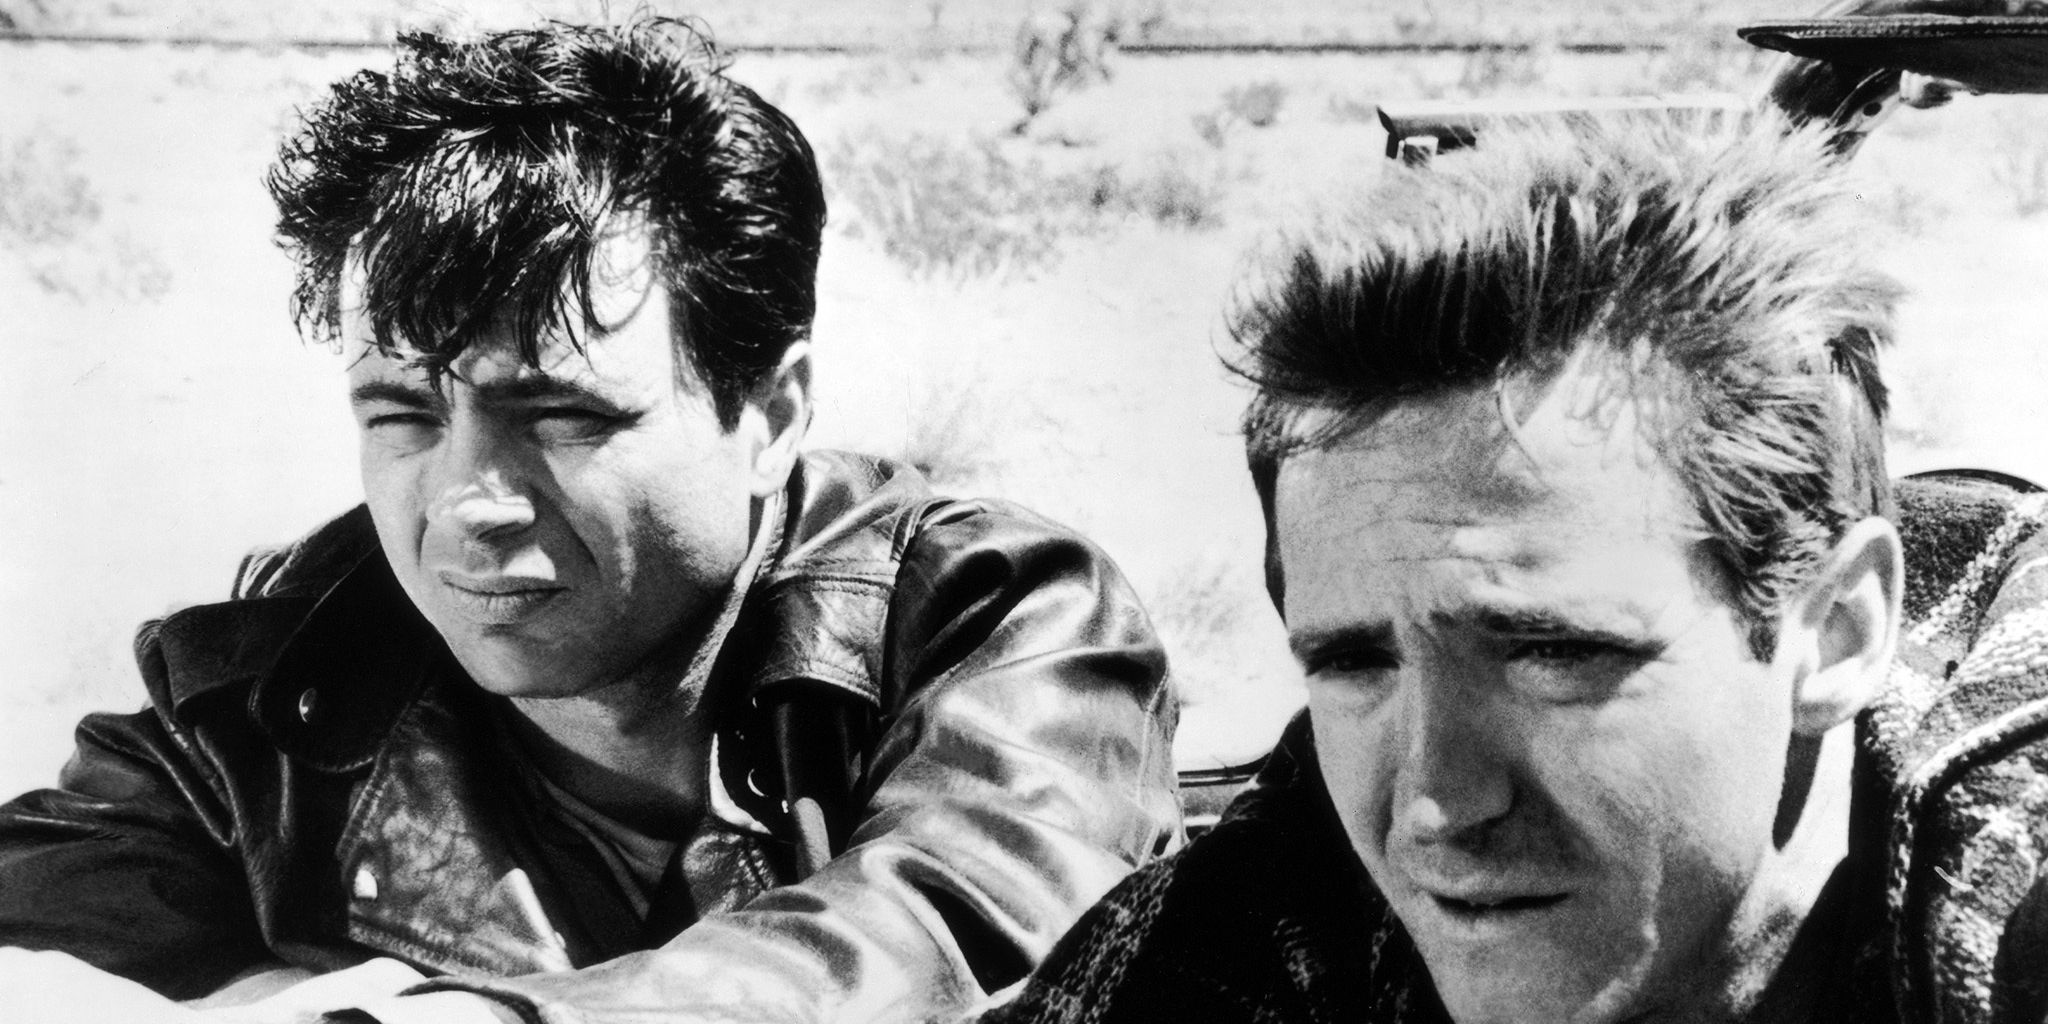 Two men watching intently from the desert in In Cold Blood